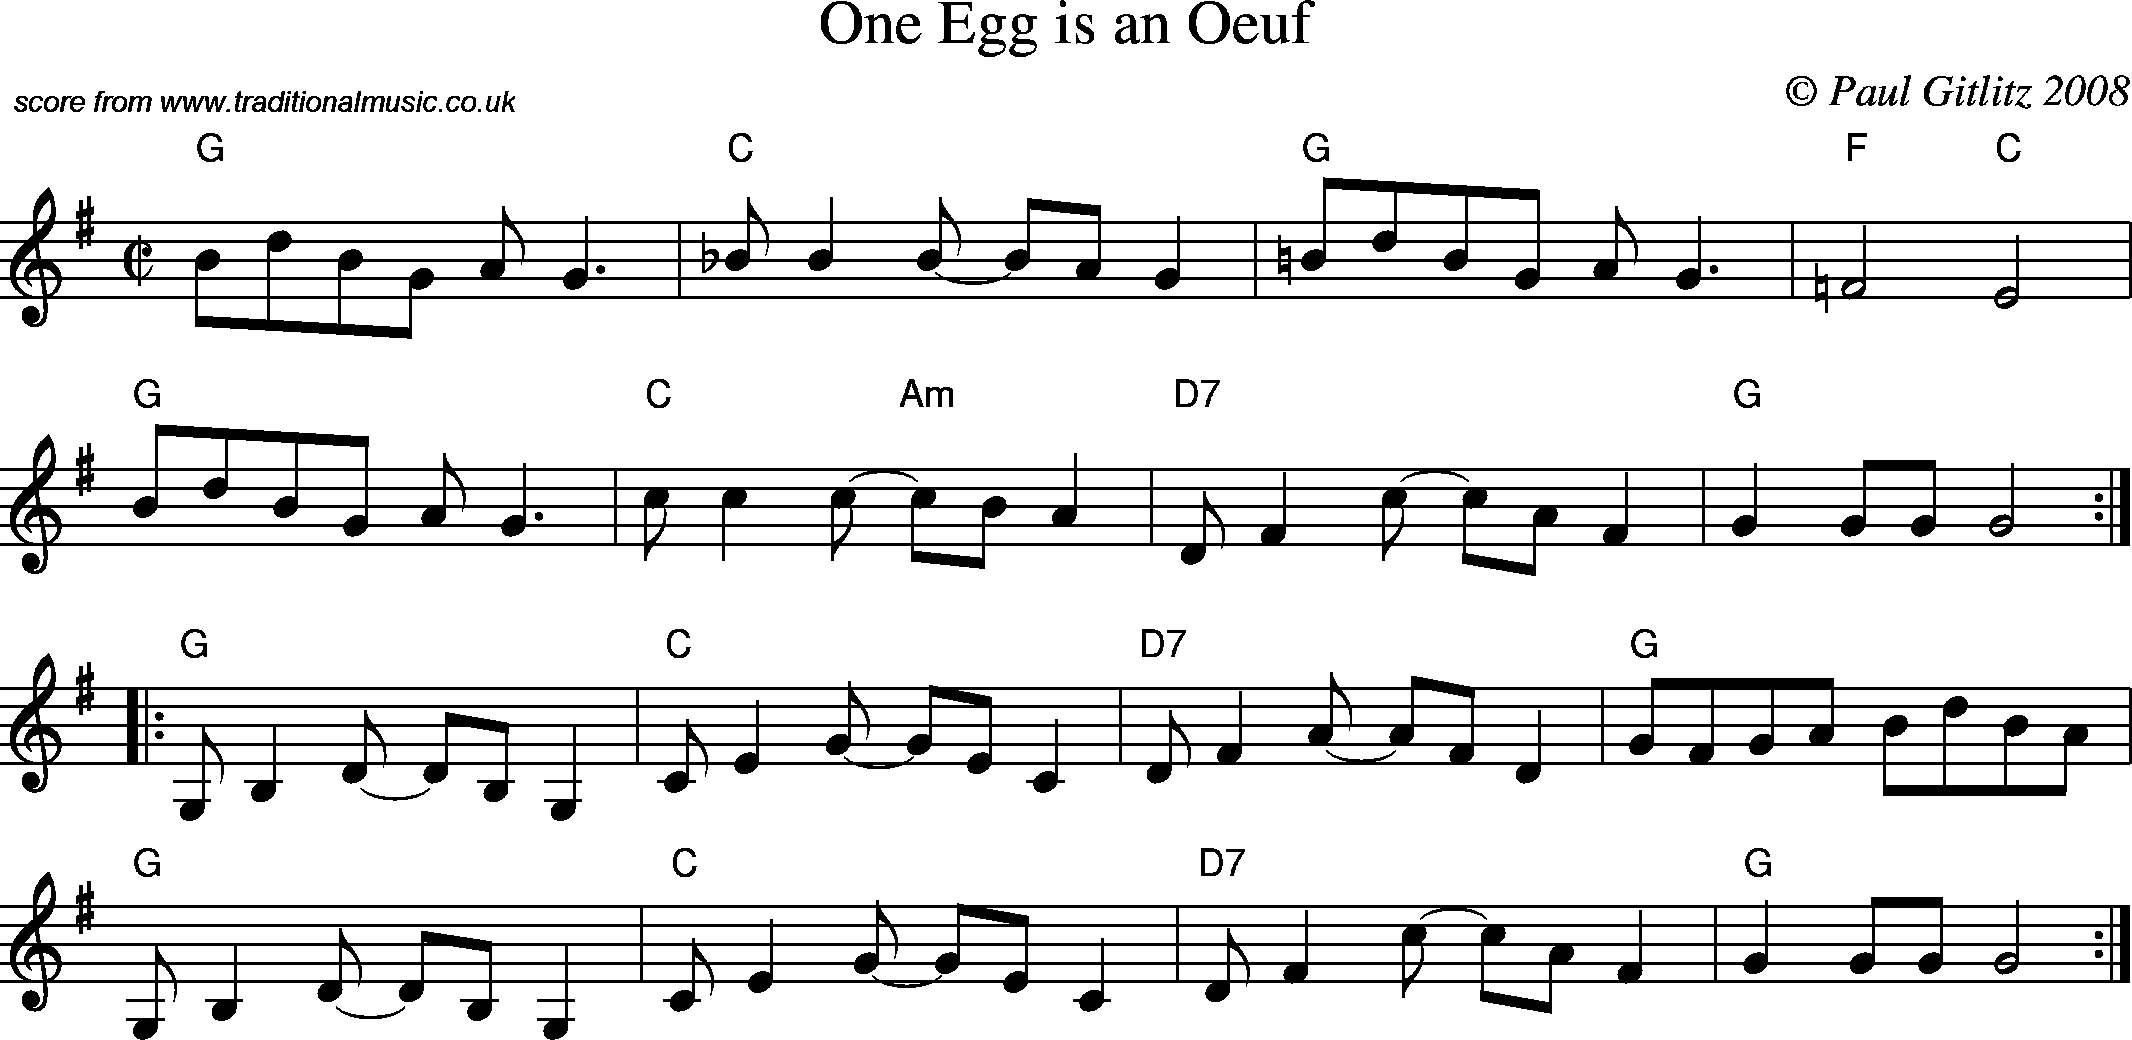 Sheet Music Score for Reel - One Egg is an Oeuf